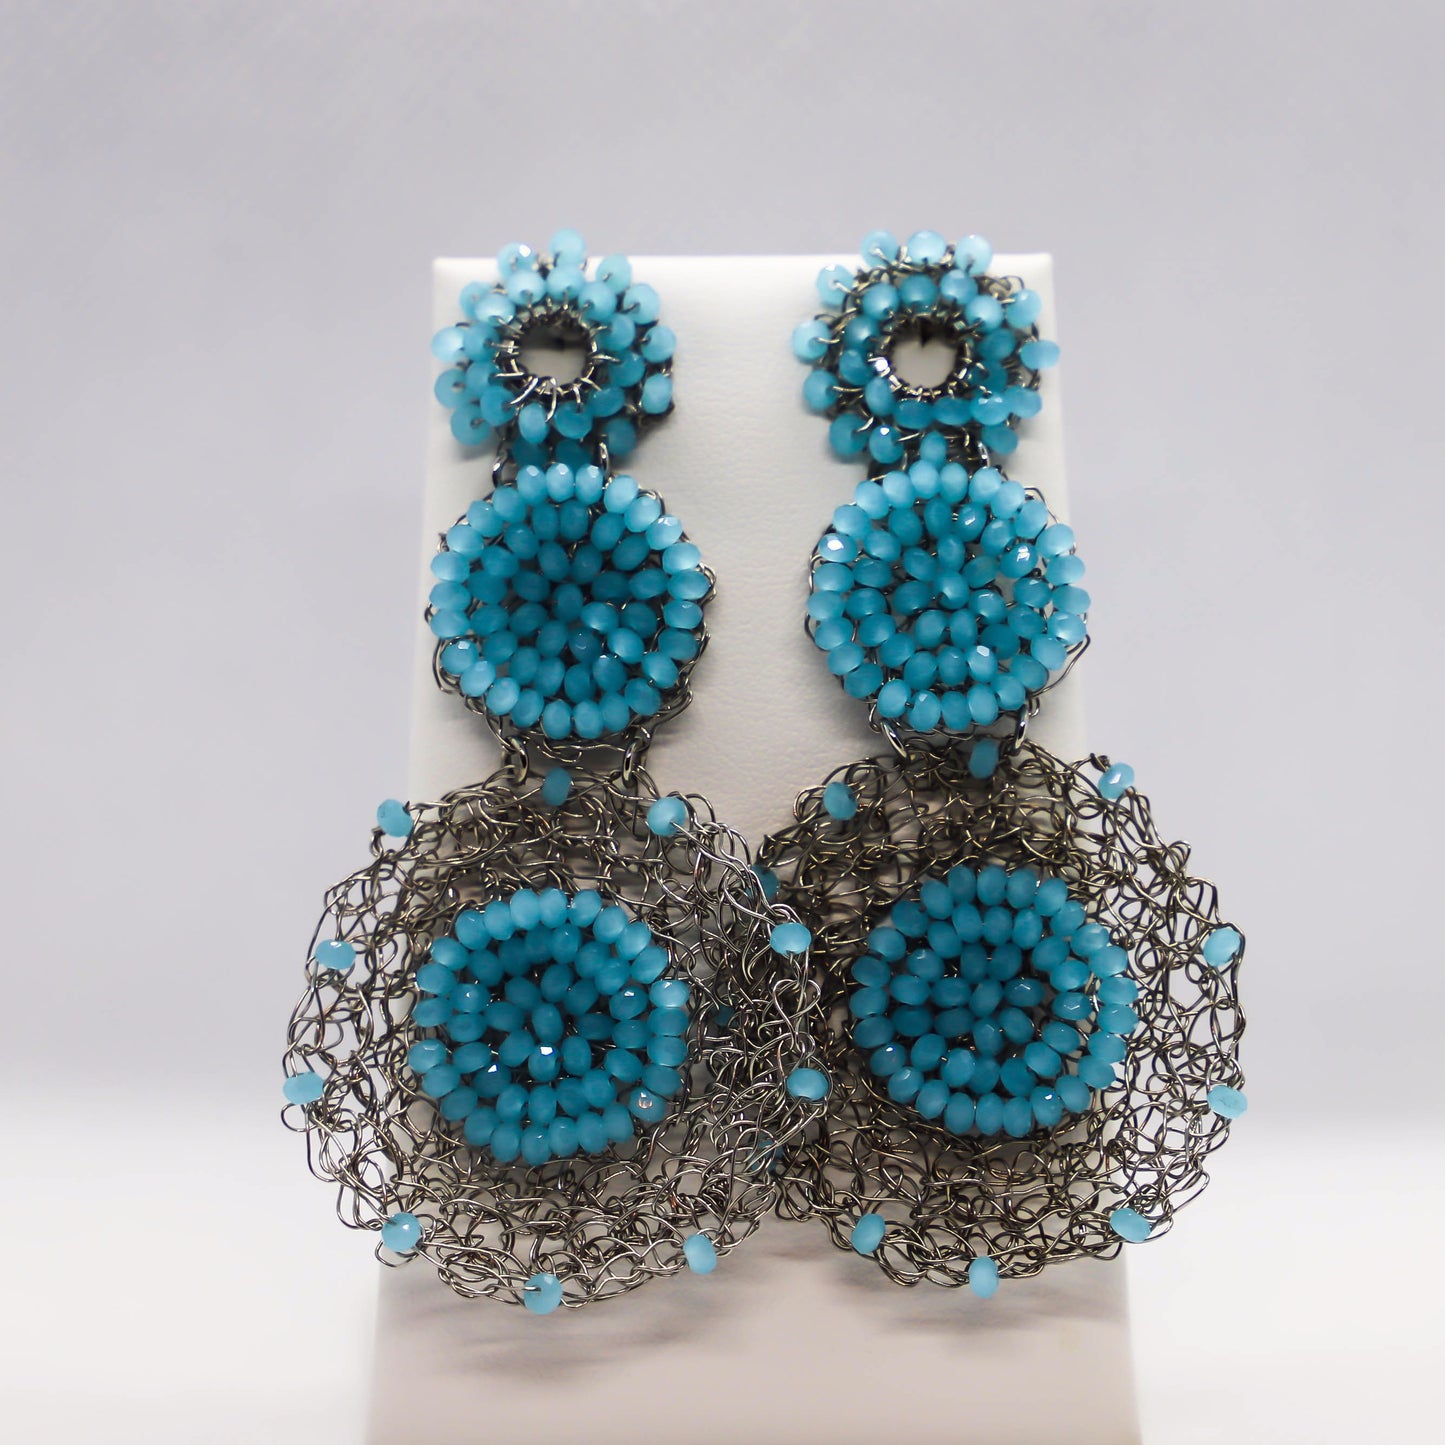 Hand crocheted circle drop earrings with light blue crystal accents